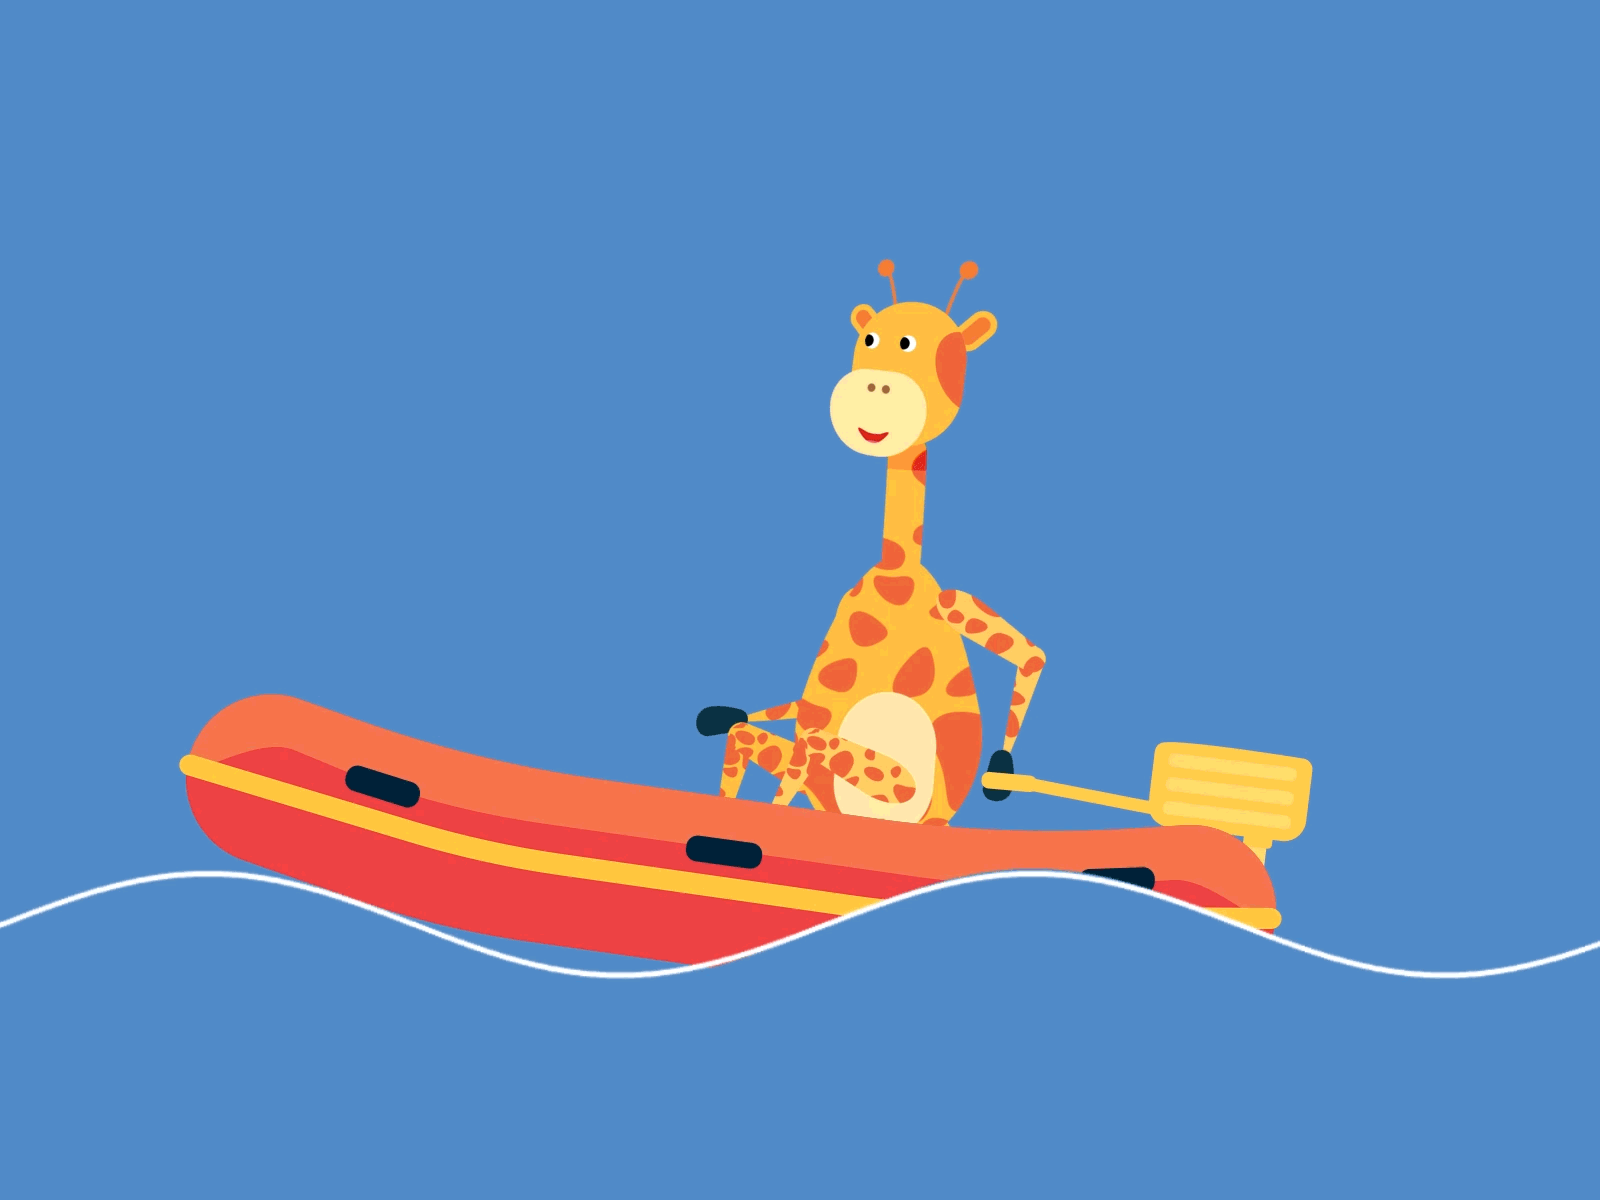 Cute Animal Giraffe on Dingi Boat Animation - After Effects adobe aftereffects animal animal character animation boat character character animation cute design giraffe minimal minimal animal minimal character mograph motion graphics riding trendy